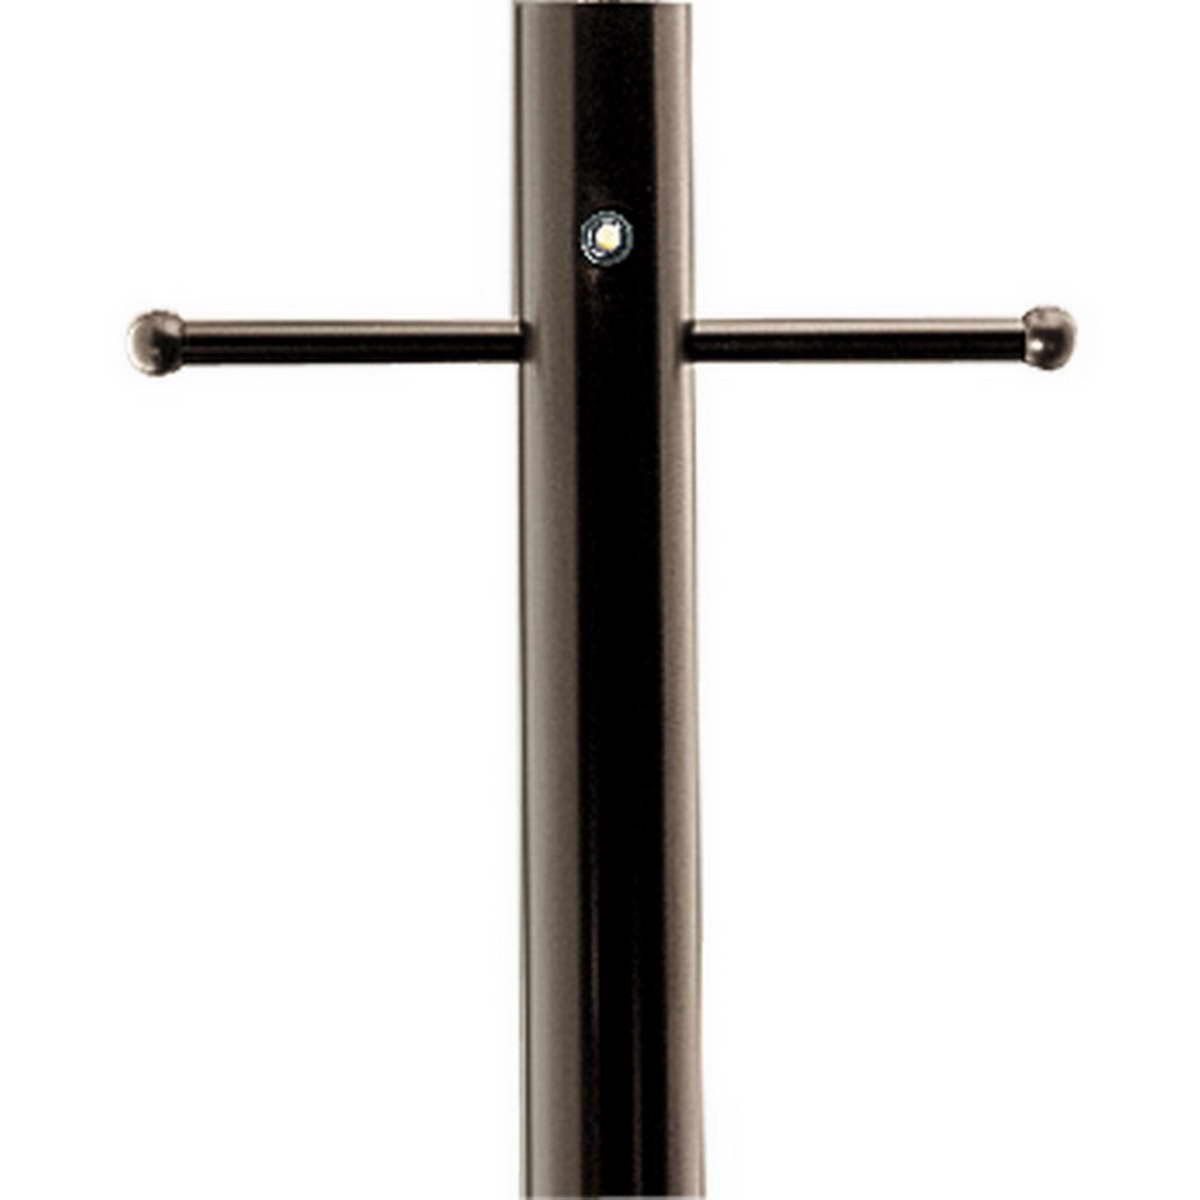 7 Ft Round Aluminum Direct Burial Pole with Photocell 3 In. Shaft Bronze Finish - Bees Lighting